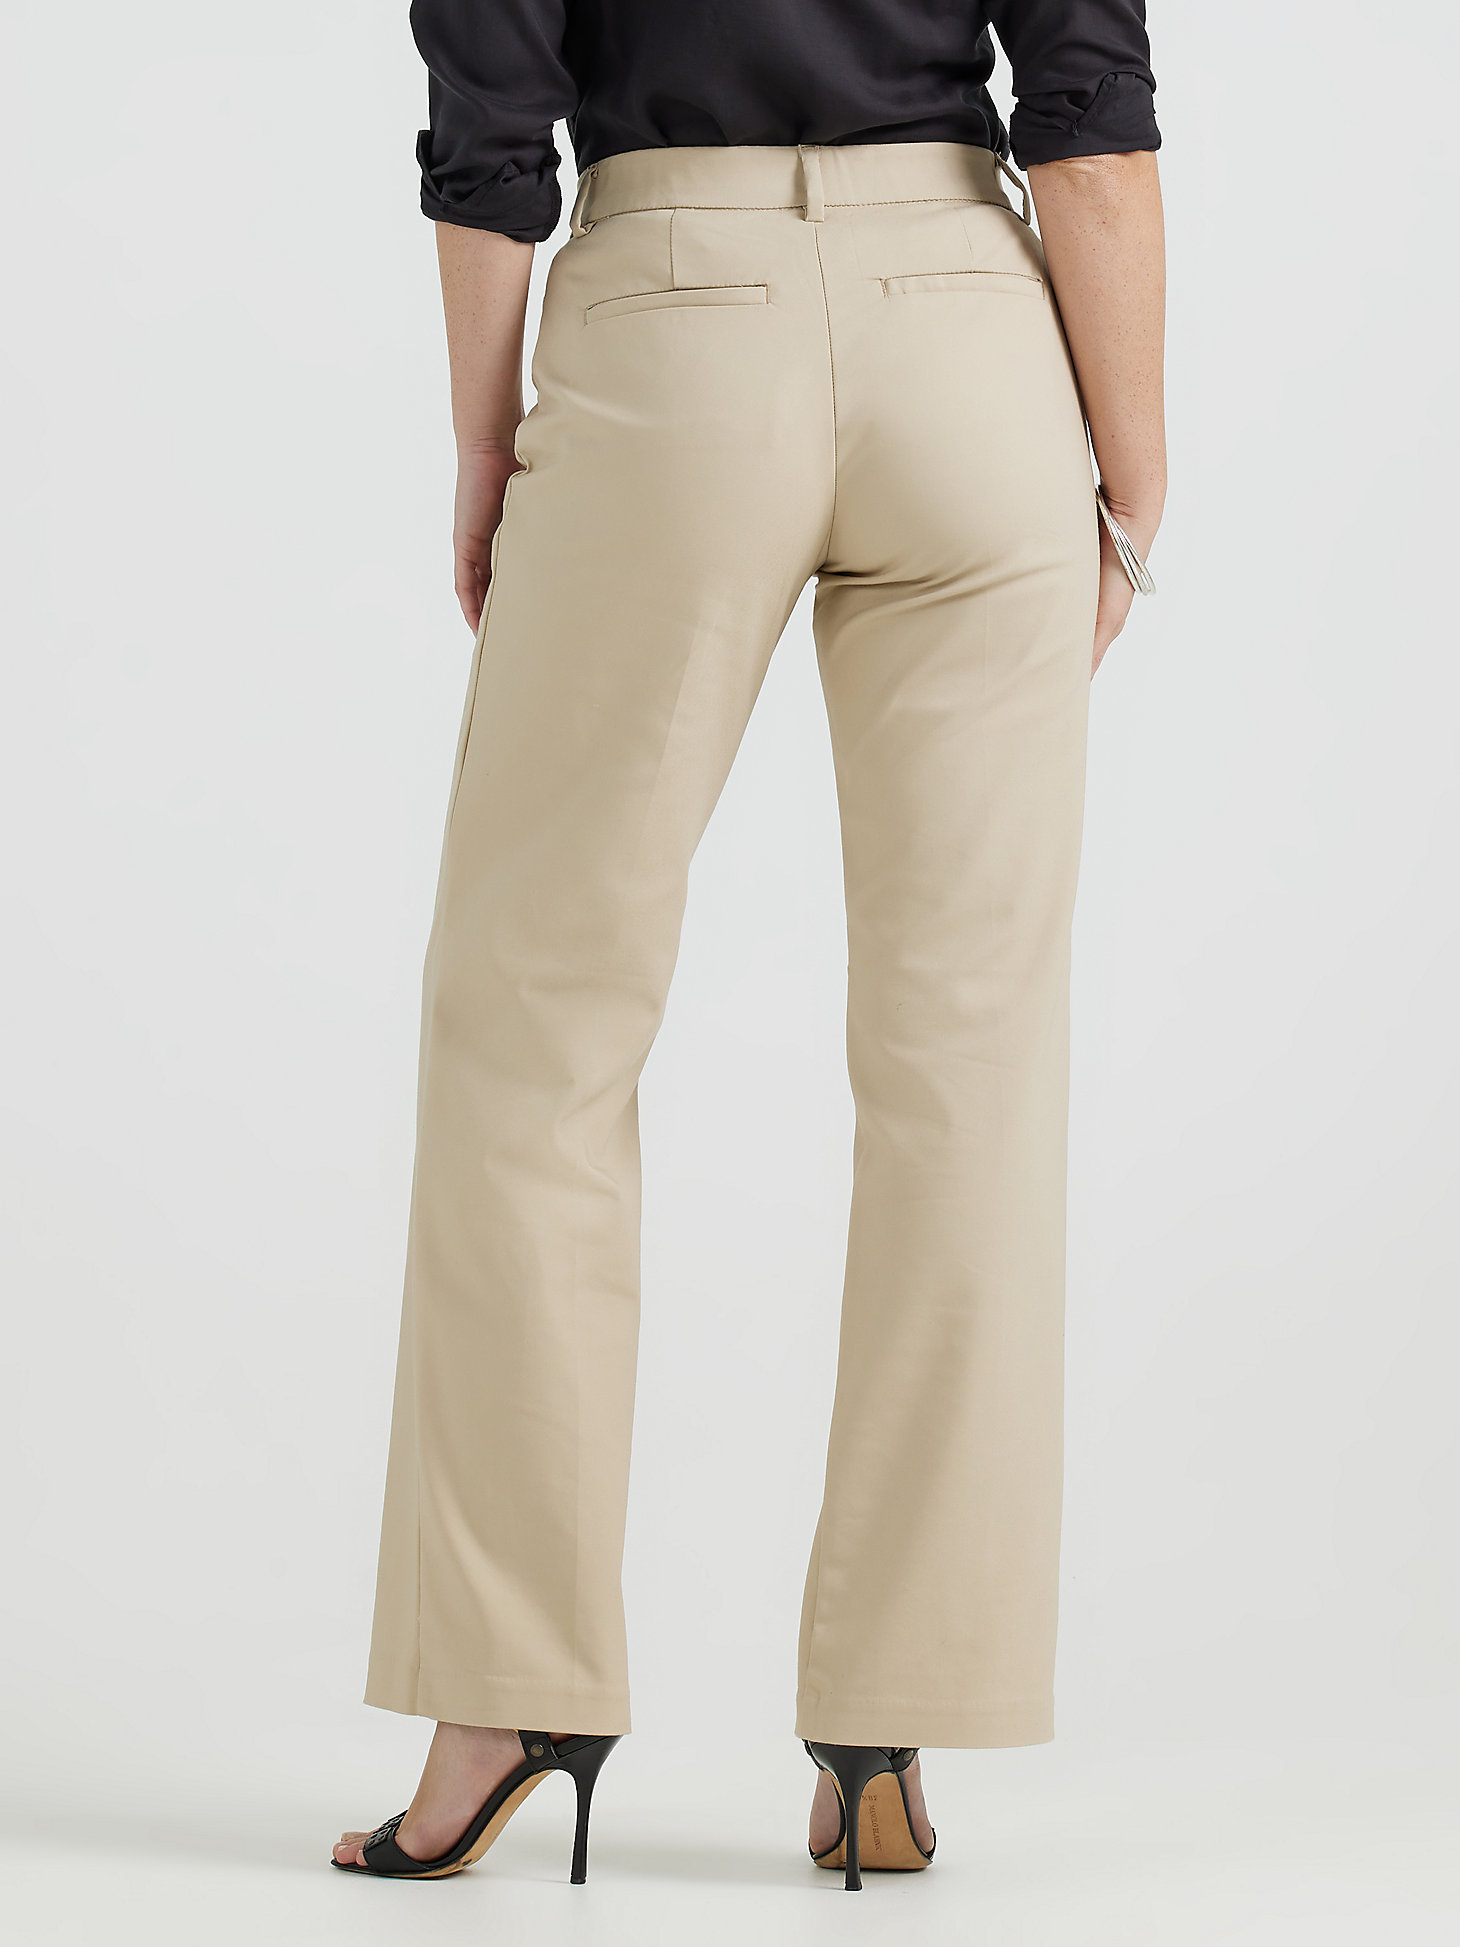 Women's Ultra Lux with Flex Motion Regular Fit Trouser Pant in Bunglow Khaki alternative view 2